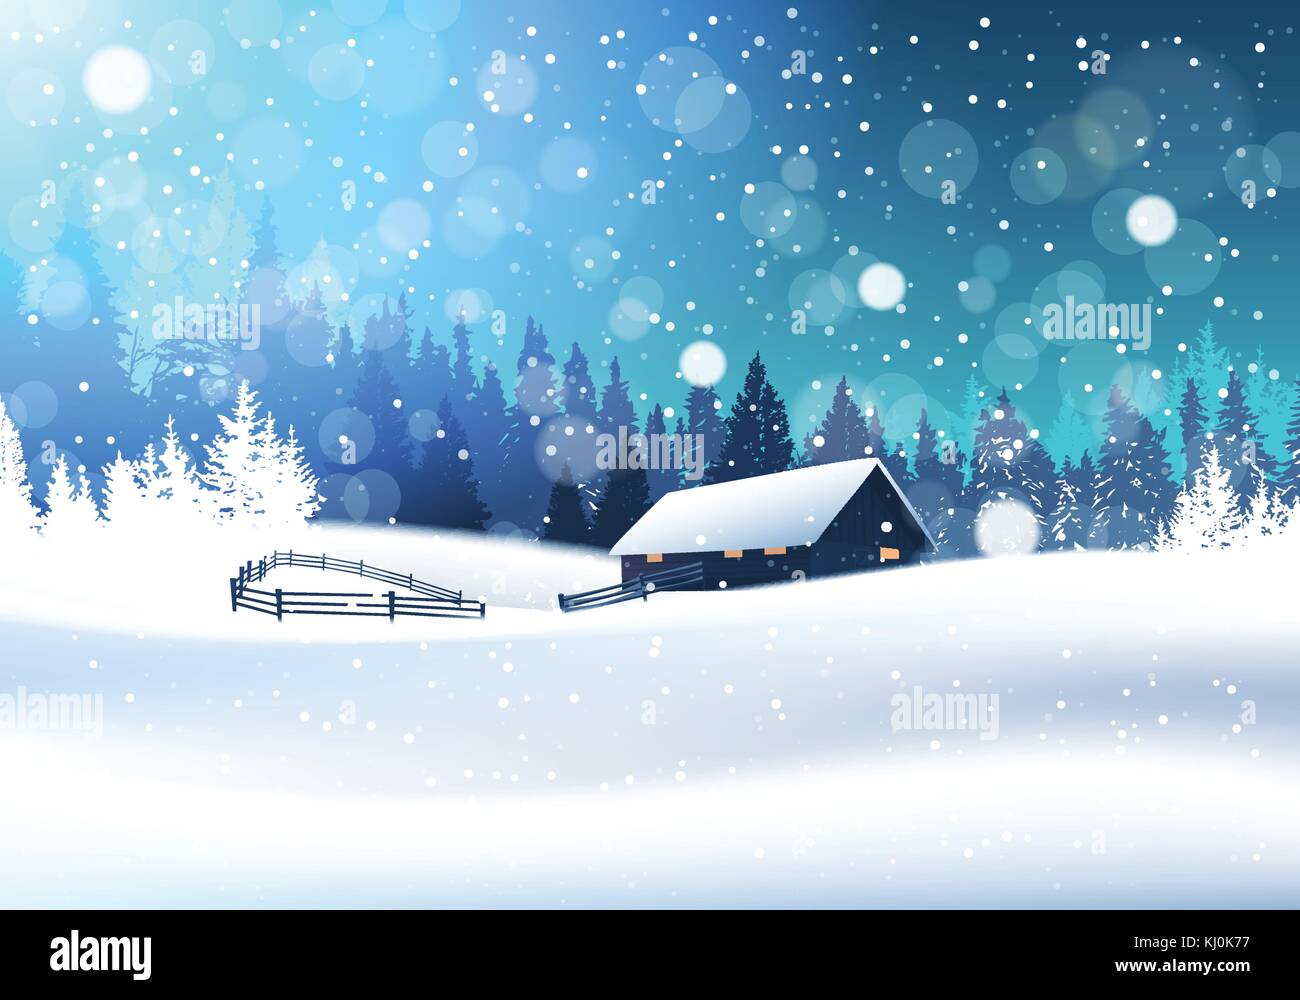 Beautiful Winter Landscape With House In Snowy Forest Stock Vector